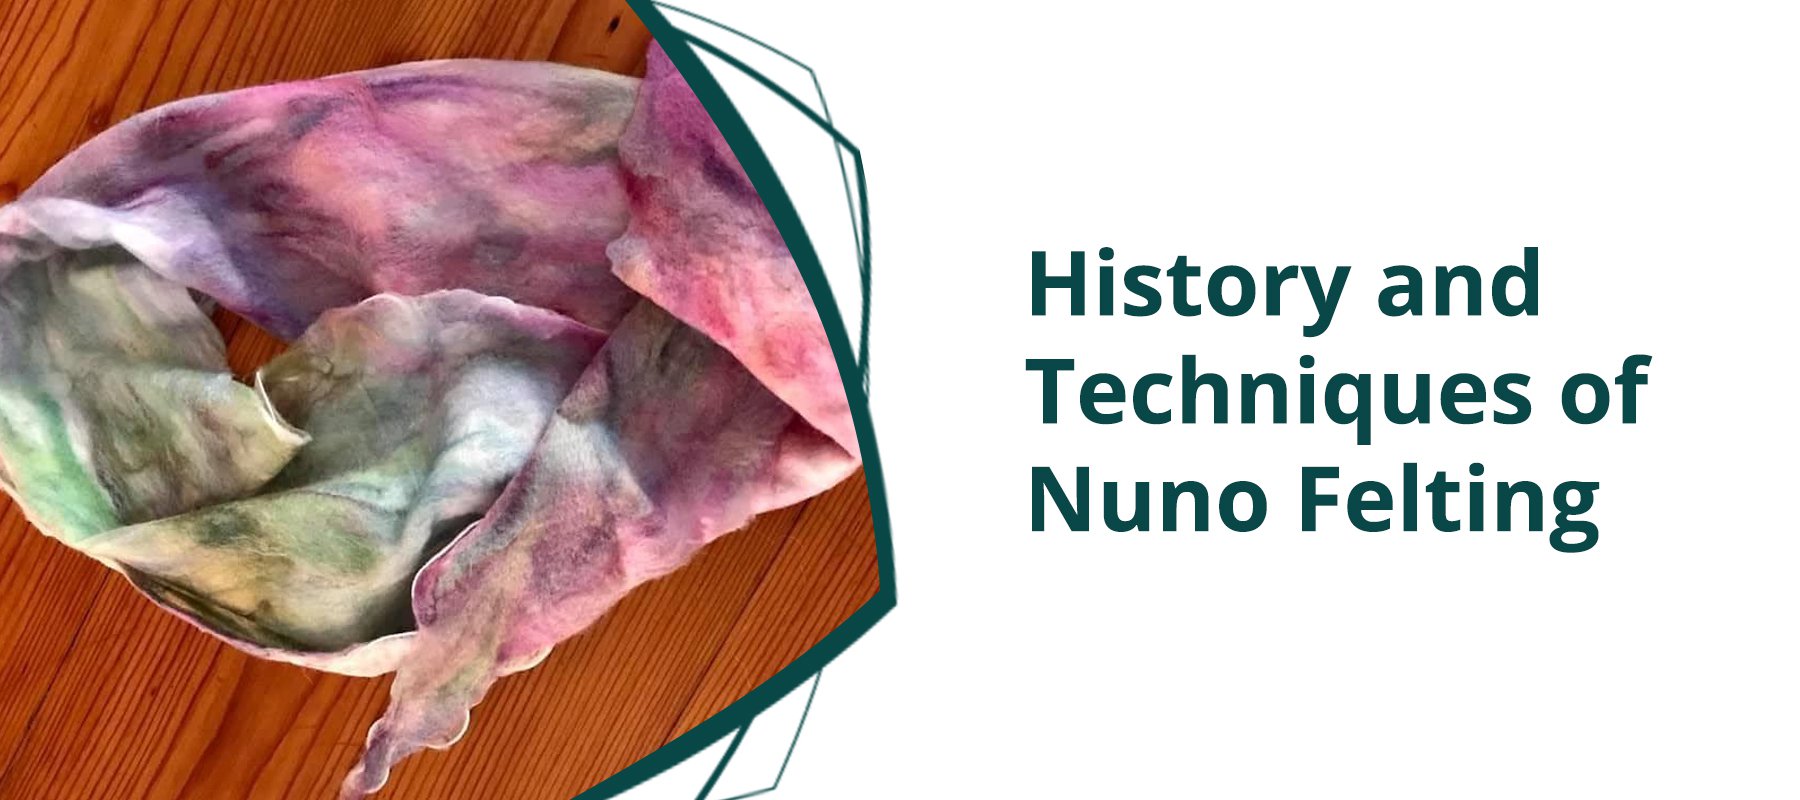 History and Techniques of Nuno Felting